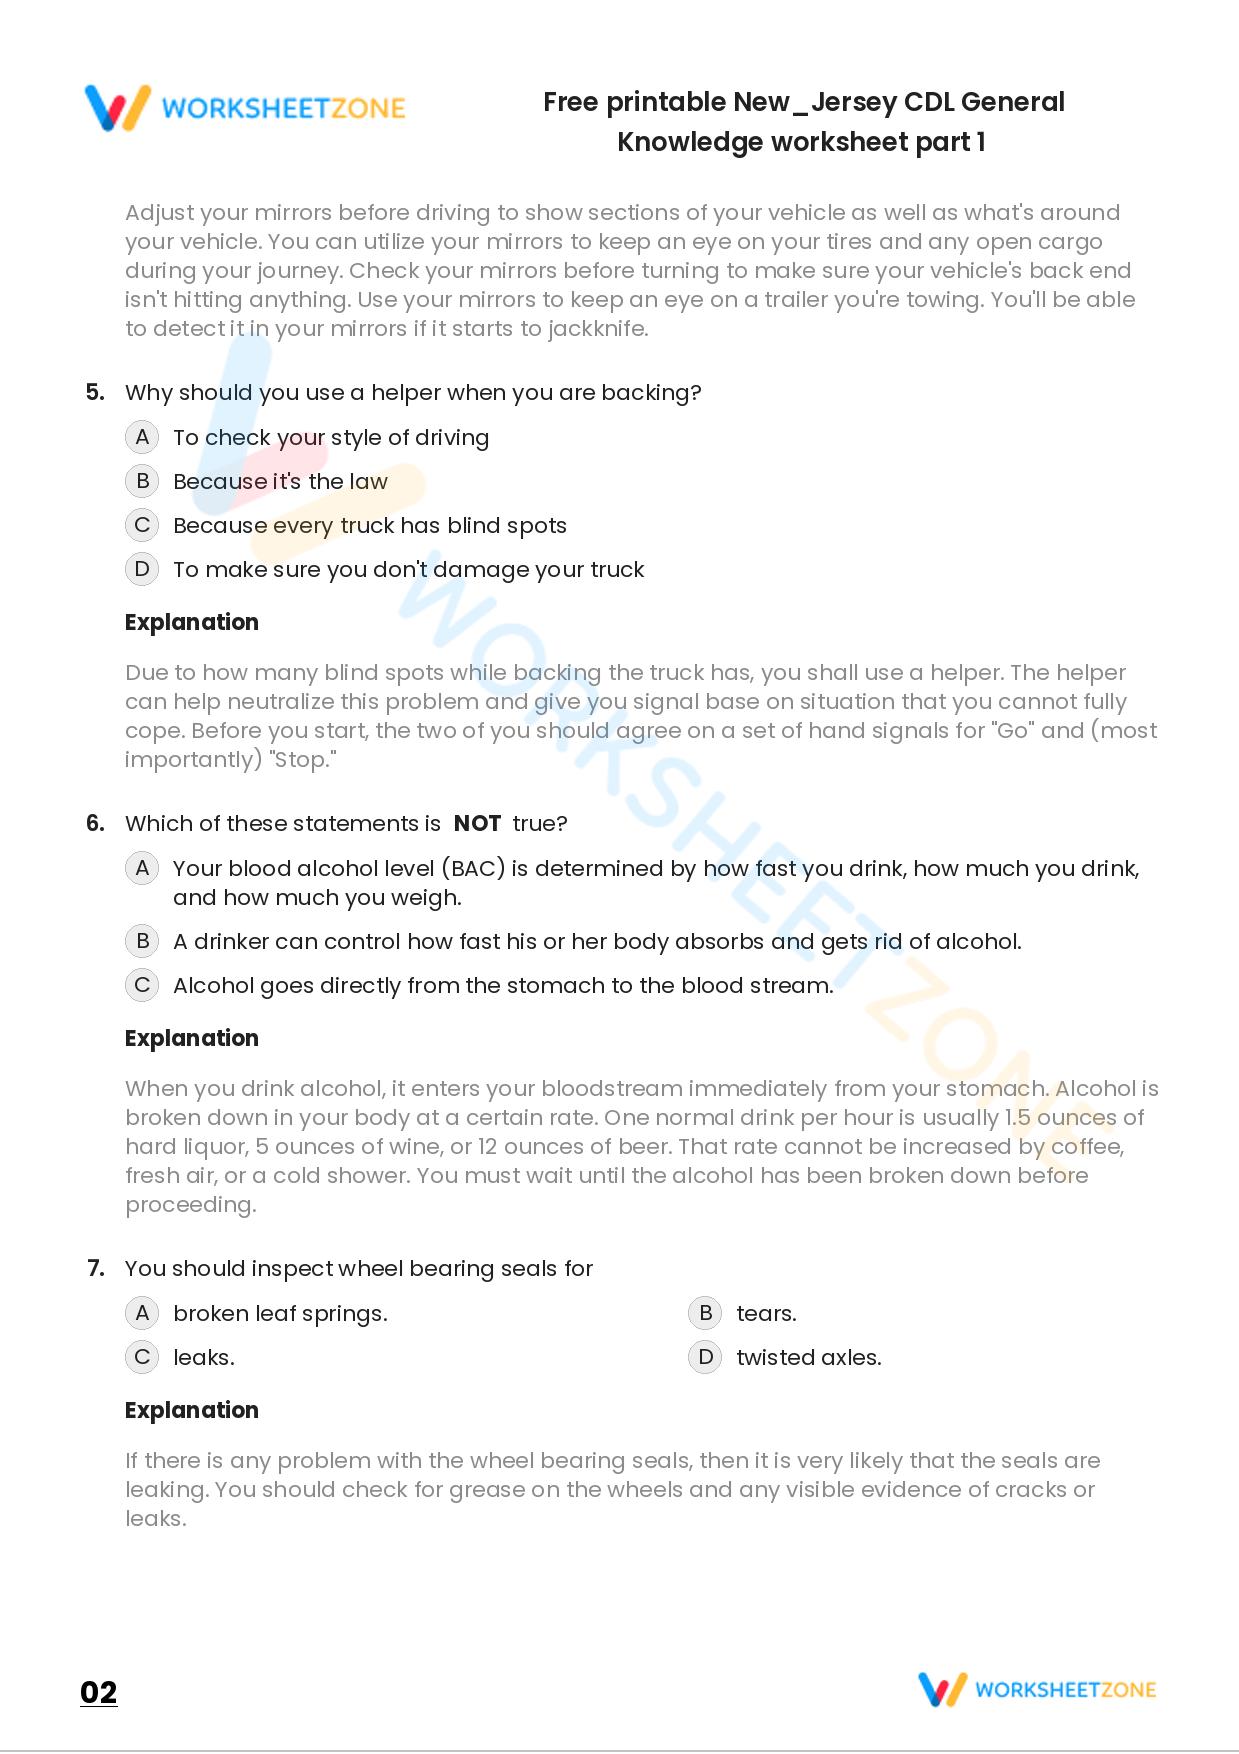 Free Printable New/Jersey CDL General Knowledge Worksheet Part 2